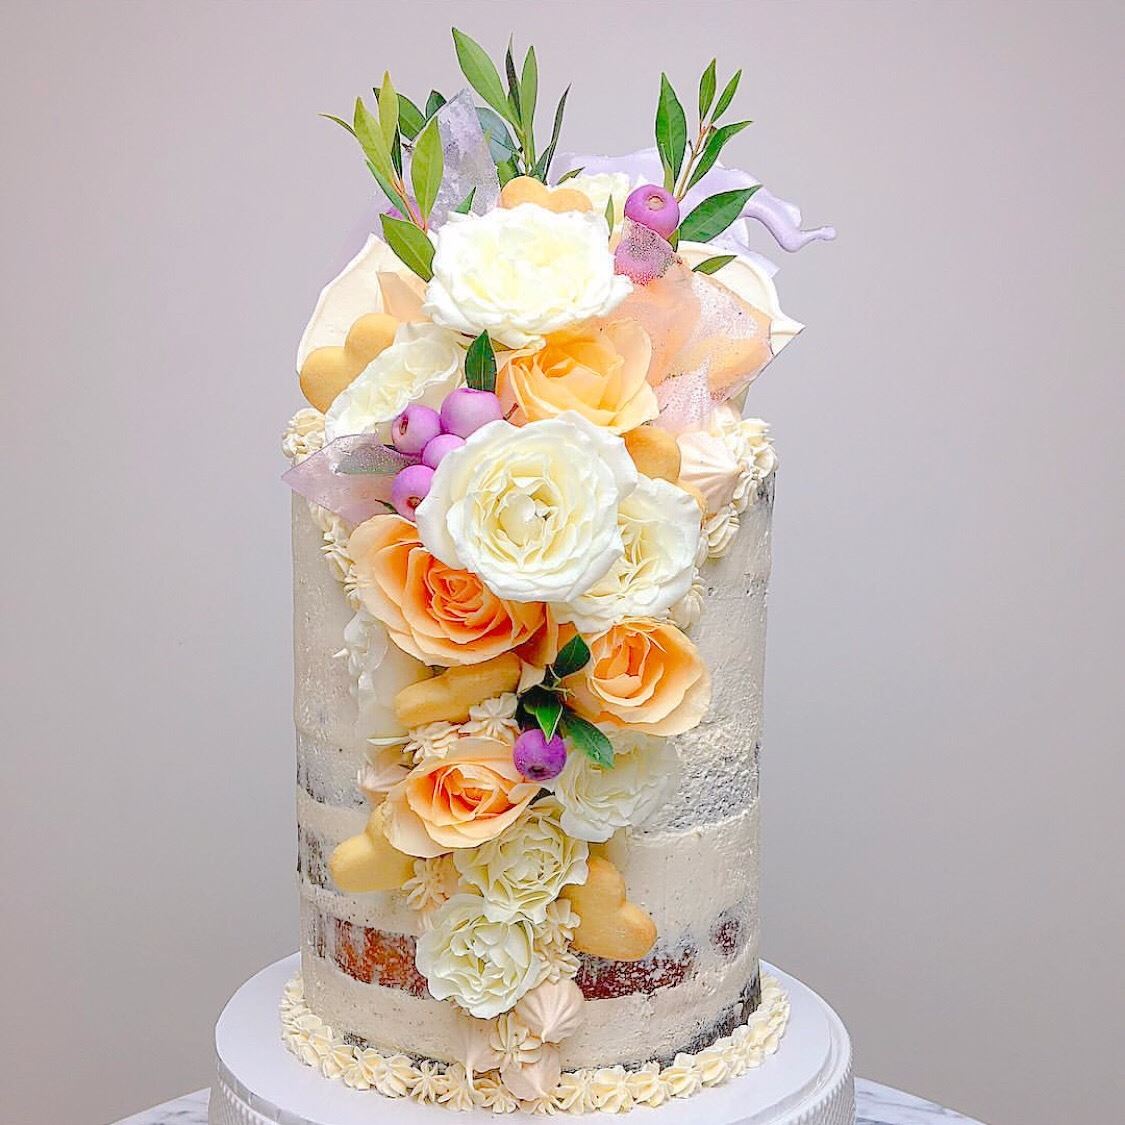 Buttercream is super tasty and works well with flowers. Image: Copper and Cocoa.